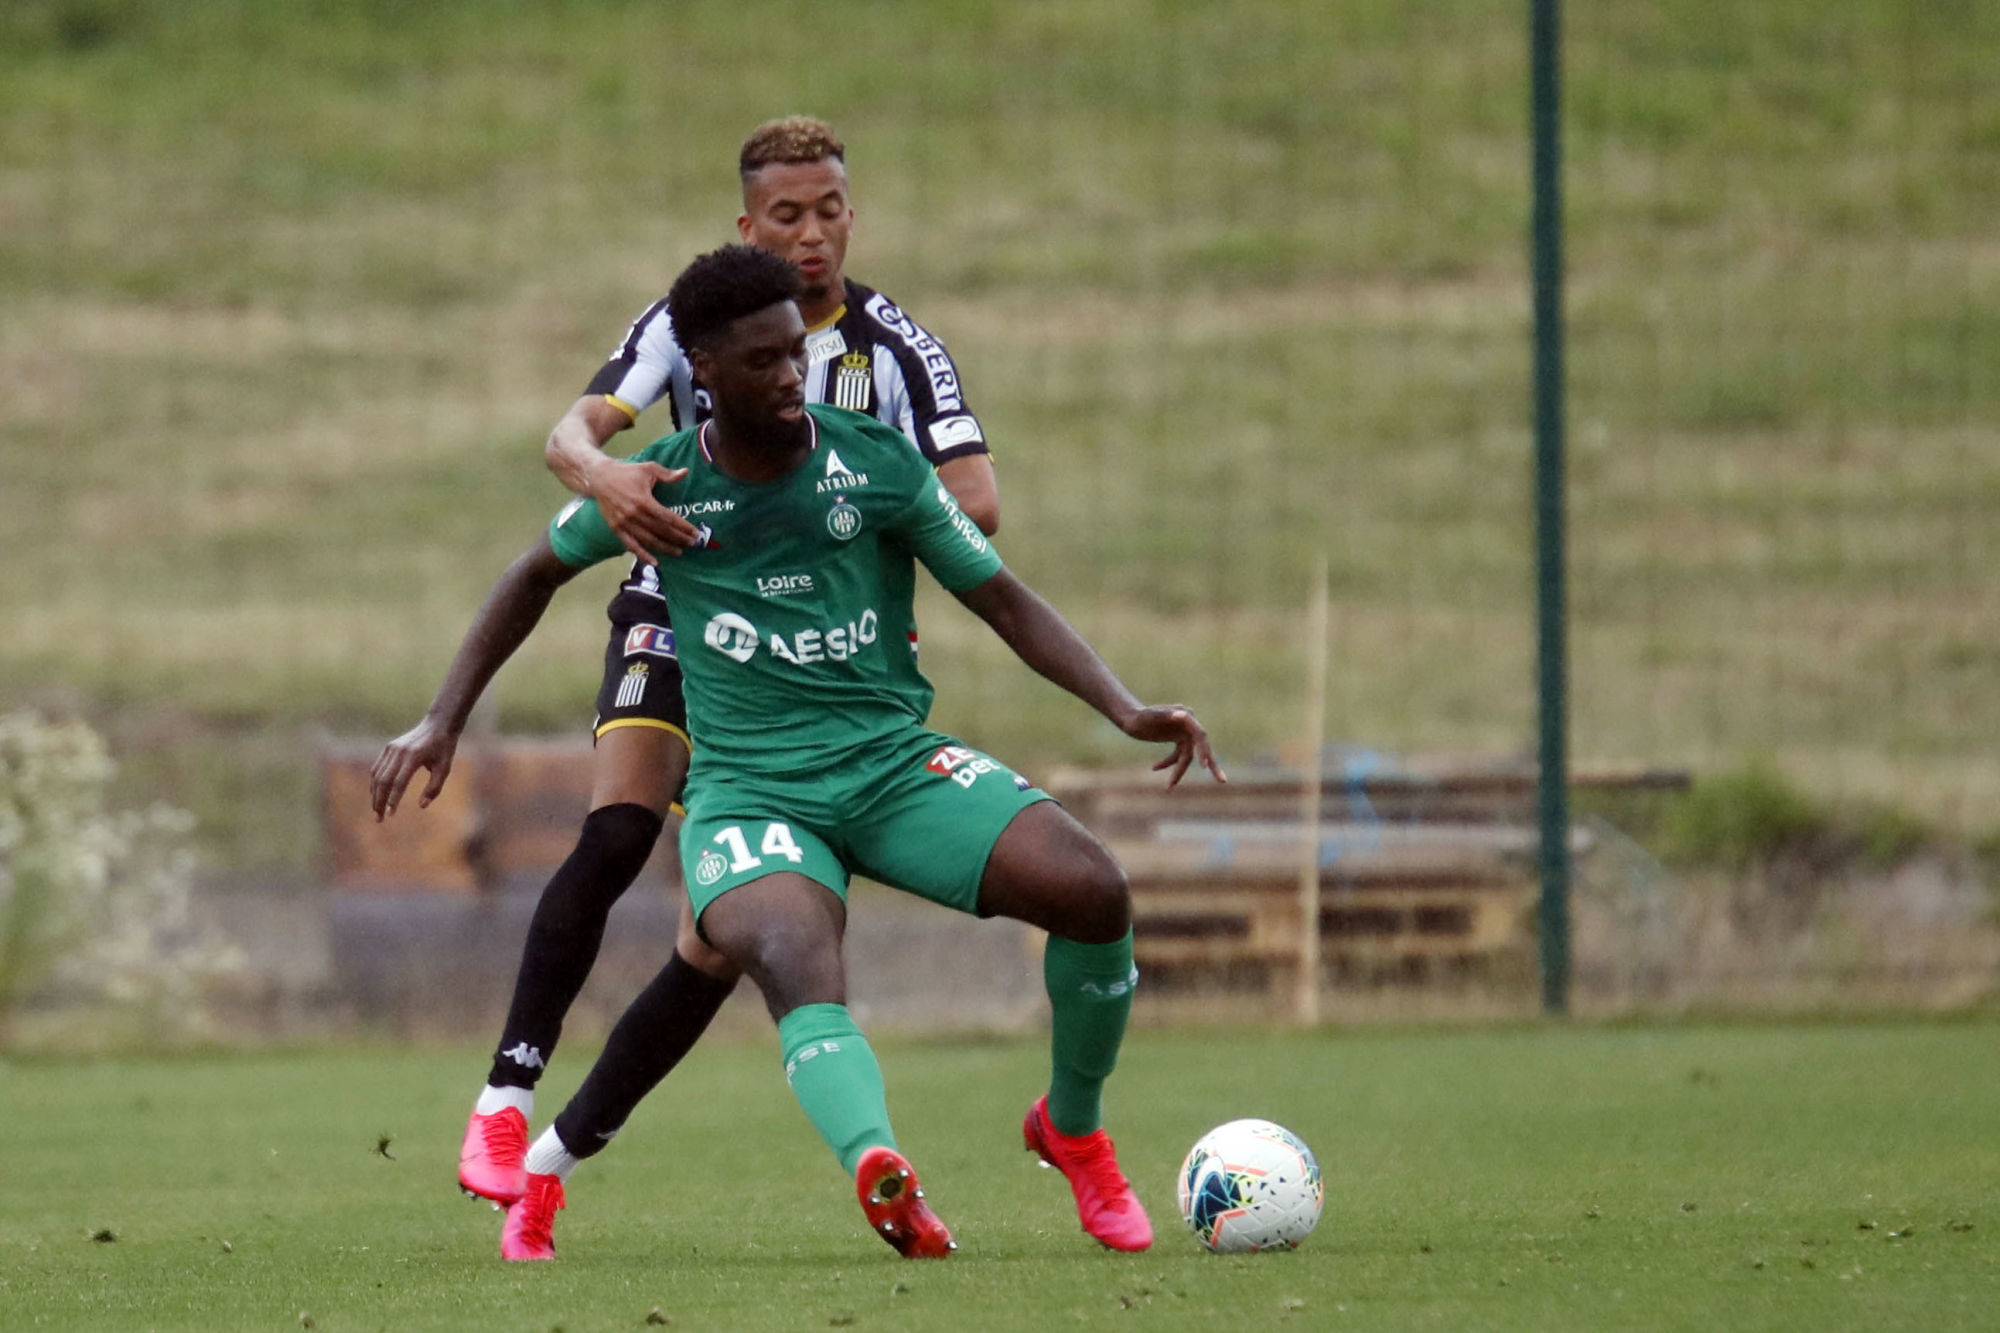 Jean Philippe KRASSO of Saint Etienne during the Friendly match between Saint Etienne and Charleroi at Stade Geoffroy-Guichard on July 15, 2020 in Saint-Etienne, France. (Photo by Romain Biard/Icon Sport) - Stade Geoffroy-Guichard - Saint Etienne (France)